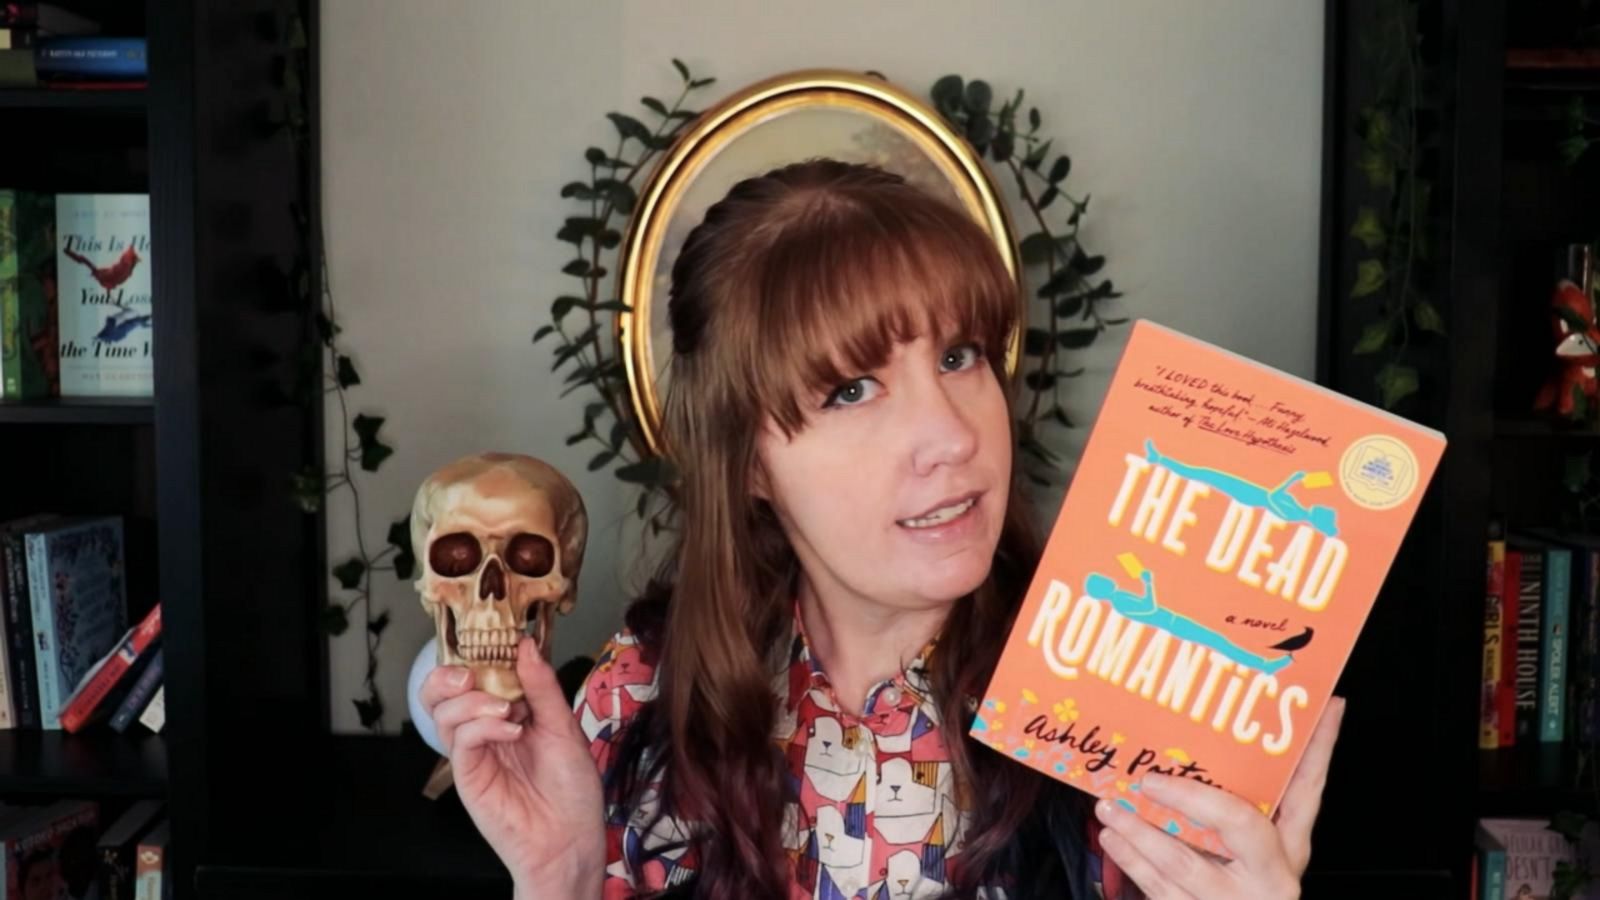 'The Dead Romantics' by Ashely Poston is July's 'GMA' Book Club pick